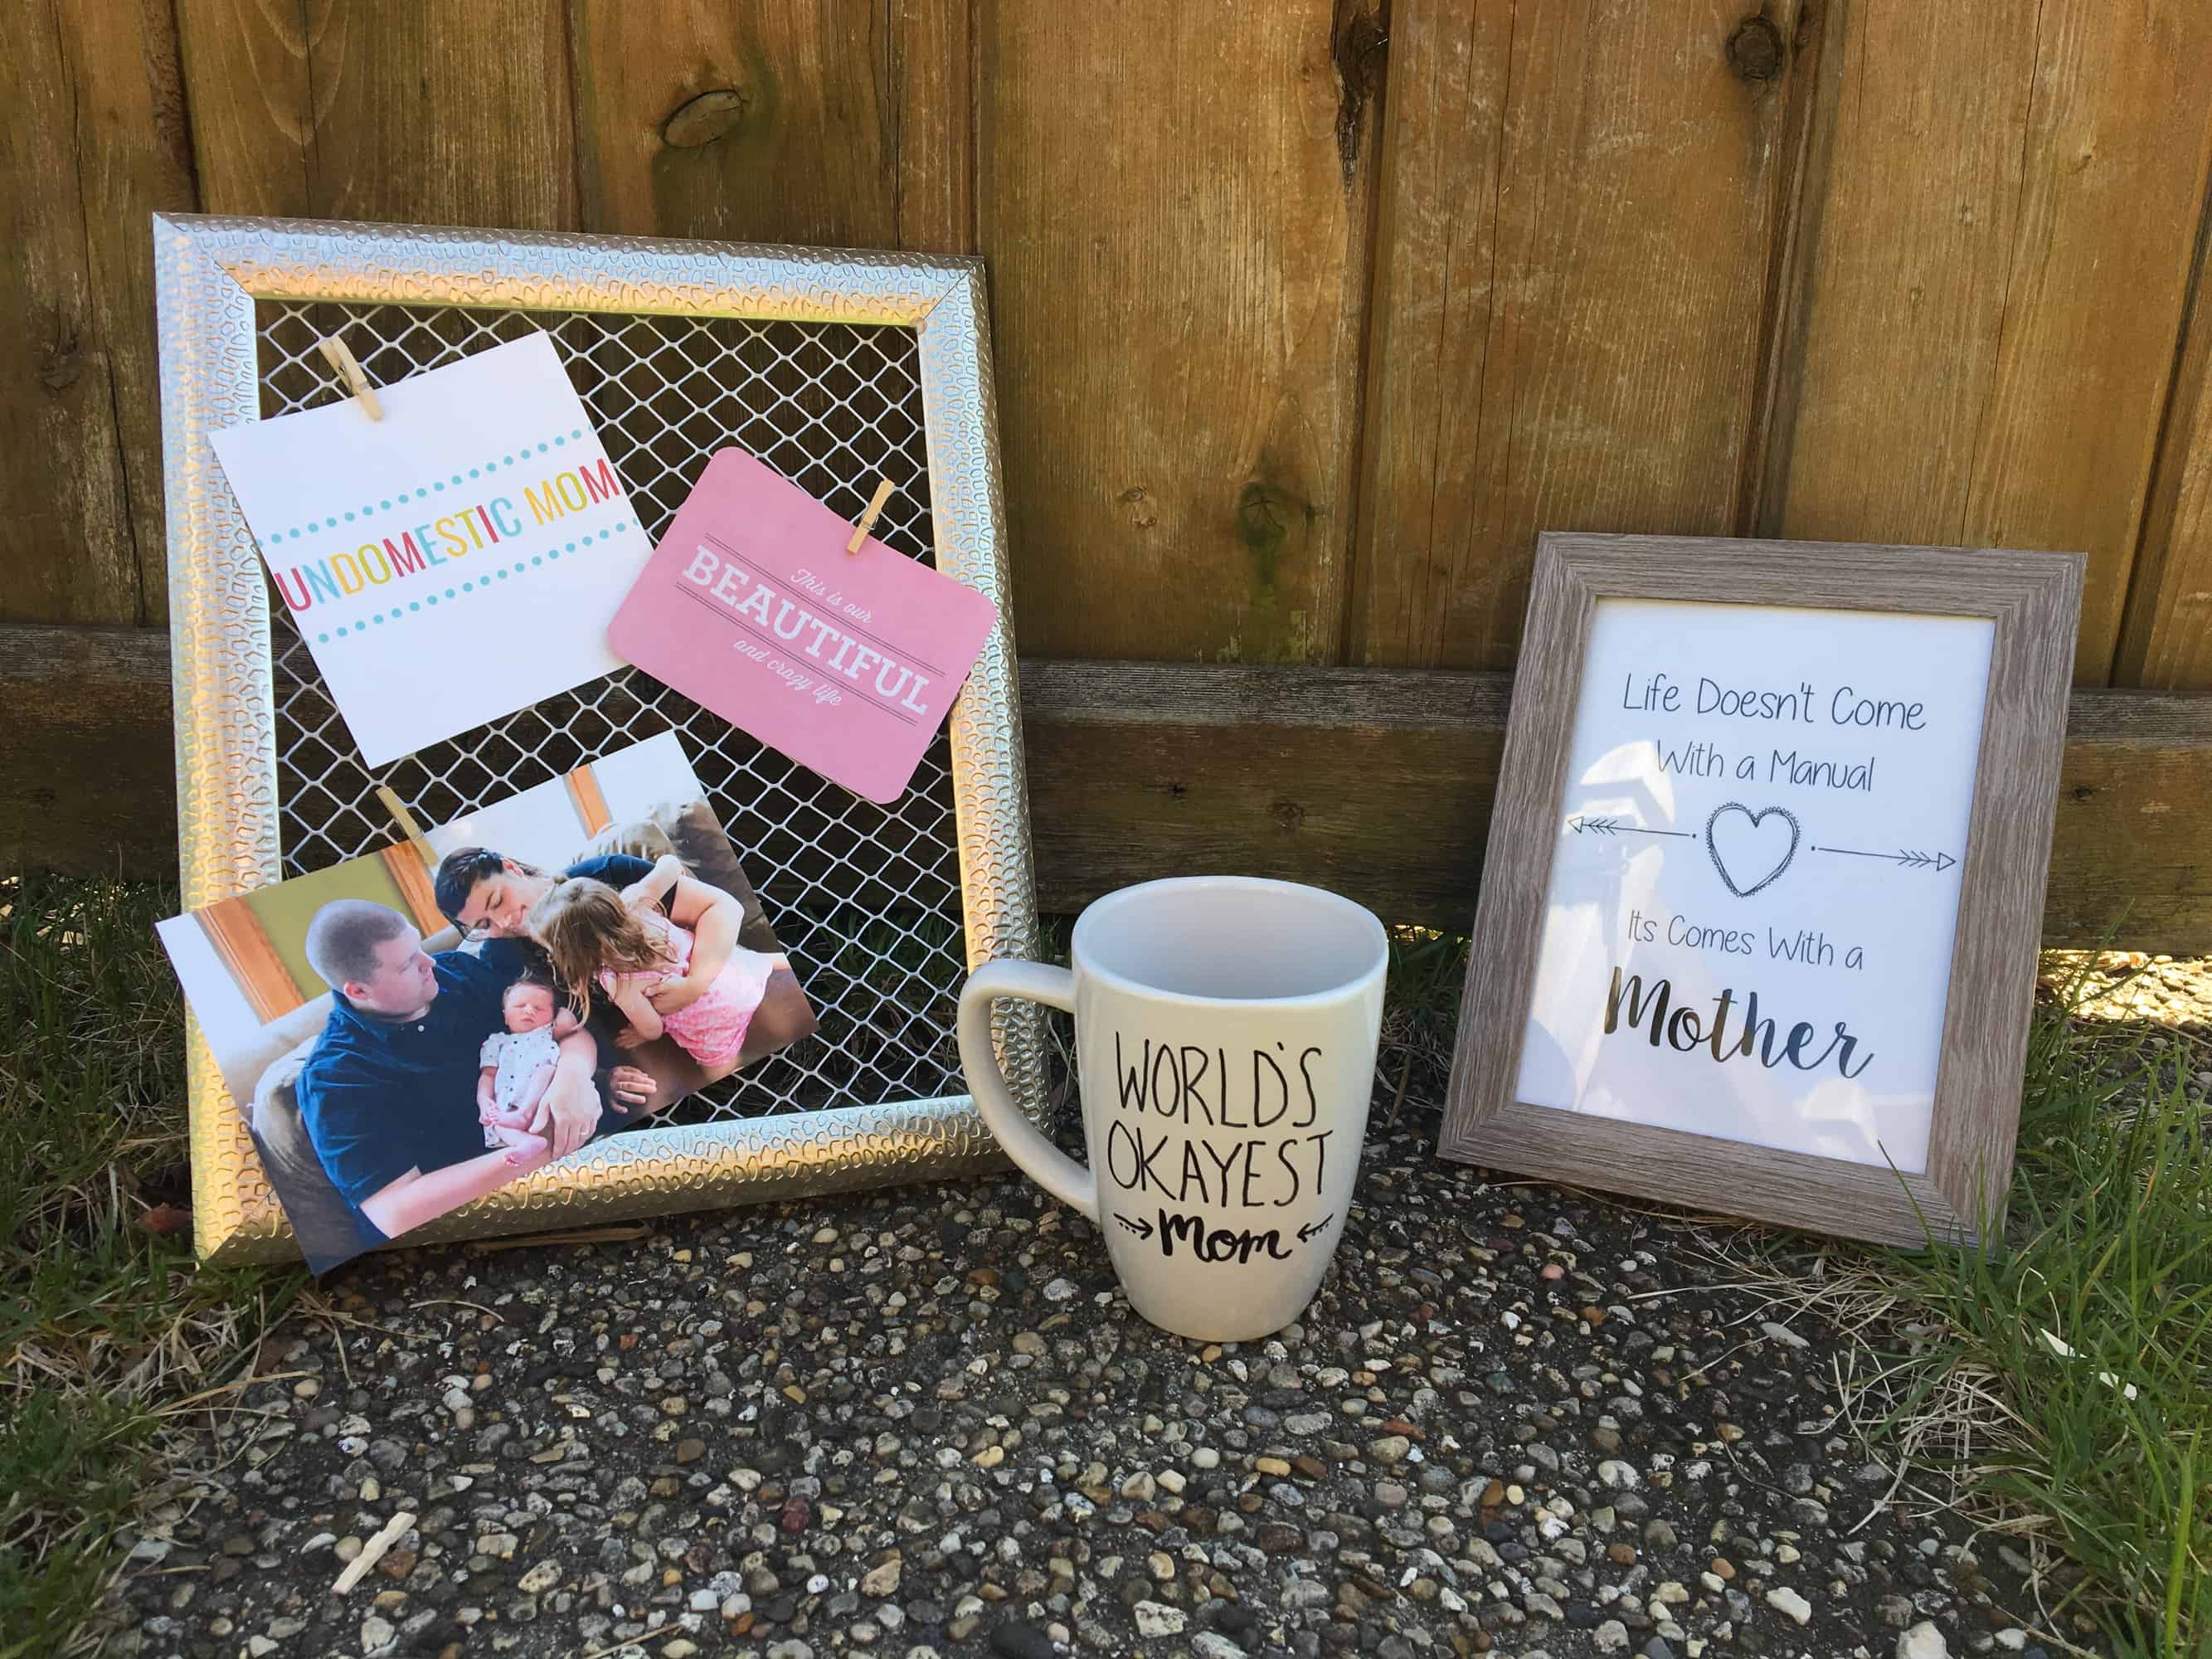 Mom Turned Upside Down Gift Mother's Day Quote Mom Present Coffee